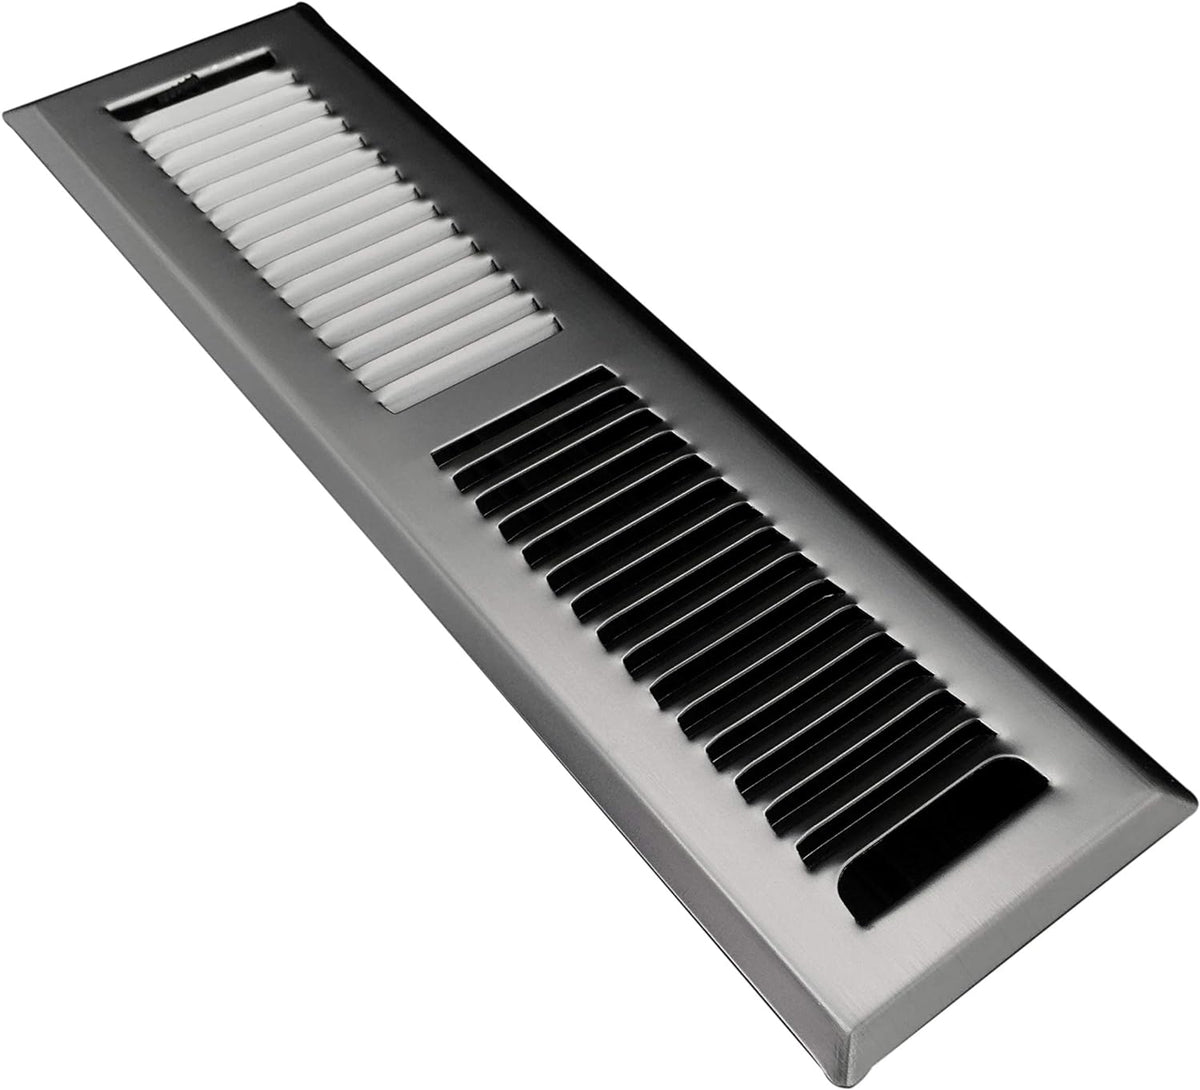 2&quot; X 10&quot; Modern Floor Register Grille with Dampers - Contempo Slotted Grate - HVAC Vent Duct Cover - Chrome